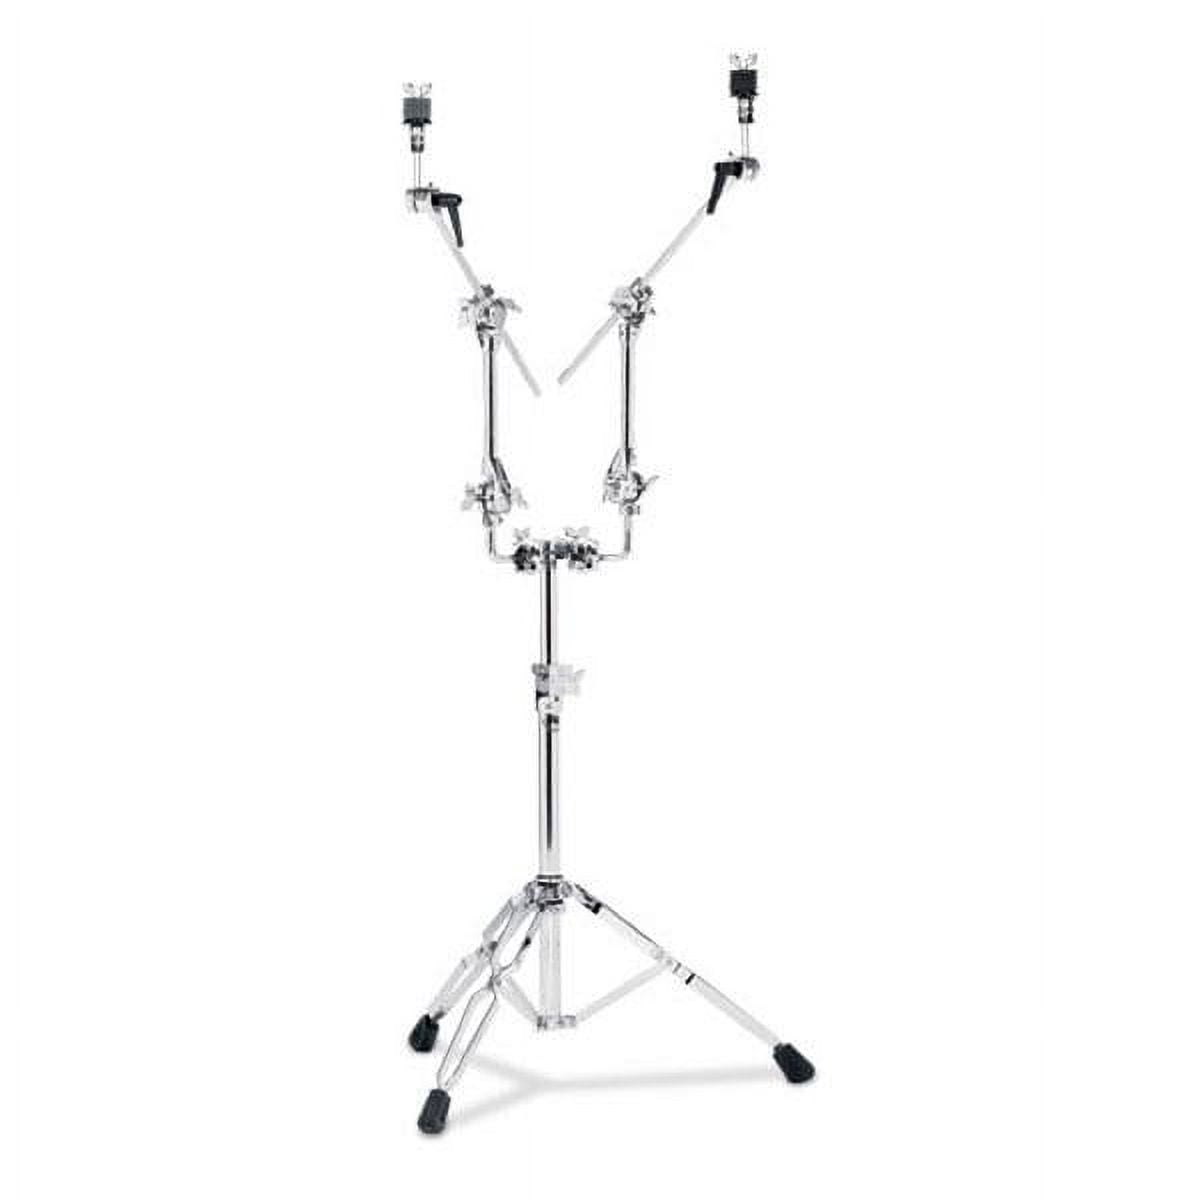 Evolve Heavy Duty Double Cymbal Stand - Chrome